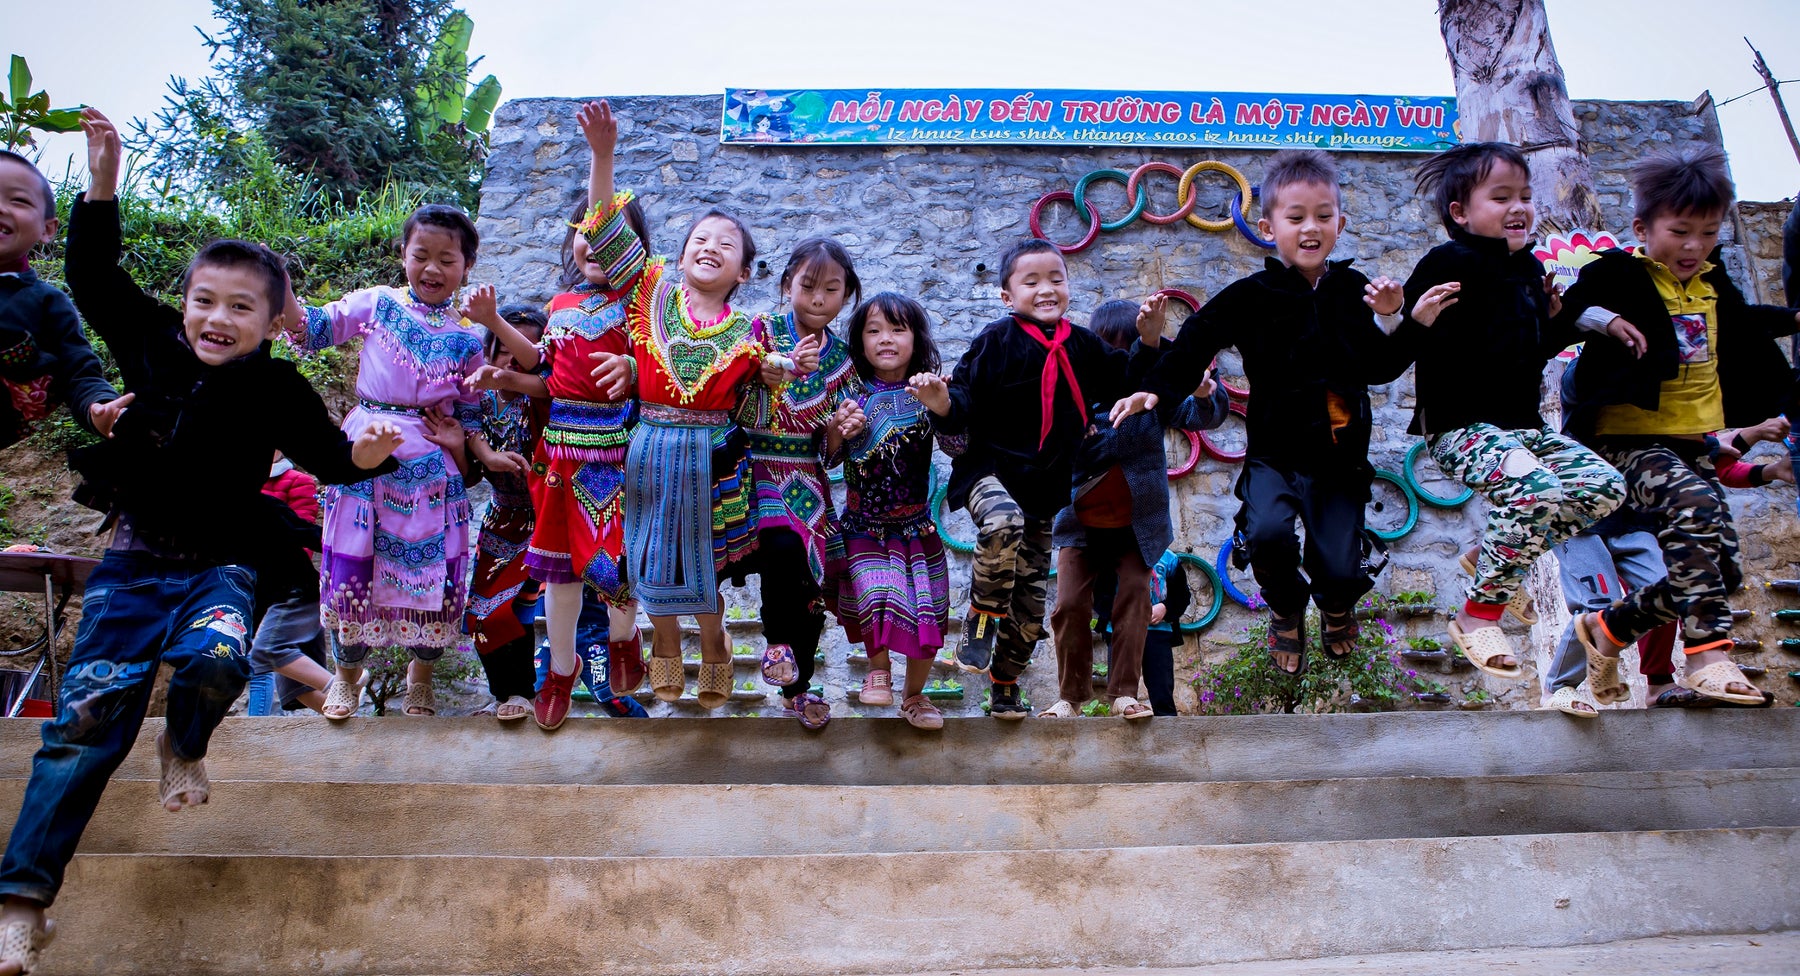 A group of children jump in the air and smile to the camera.